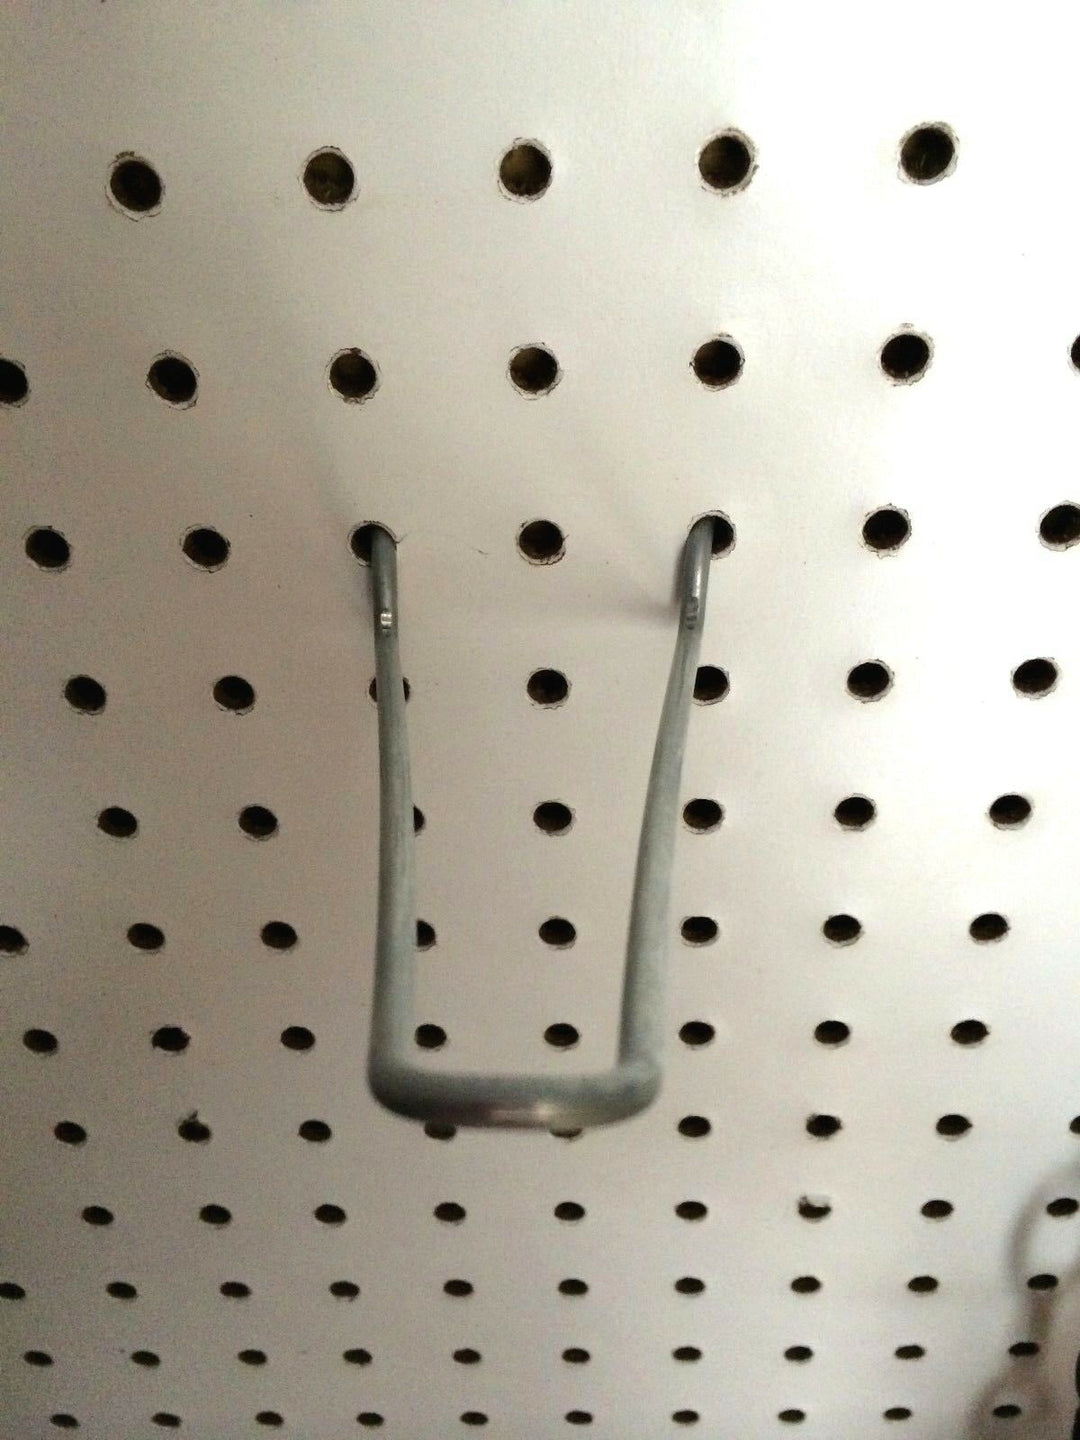 (10 PACK) 6" Looped Metal Peg Hooks w/Elevated Tip. Fits 1/8 to 1/4 Pegboard